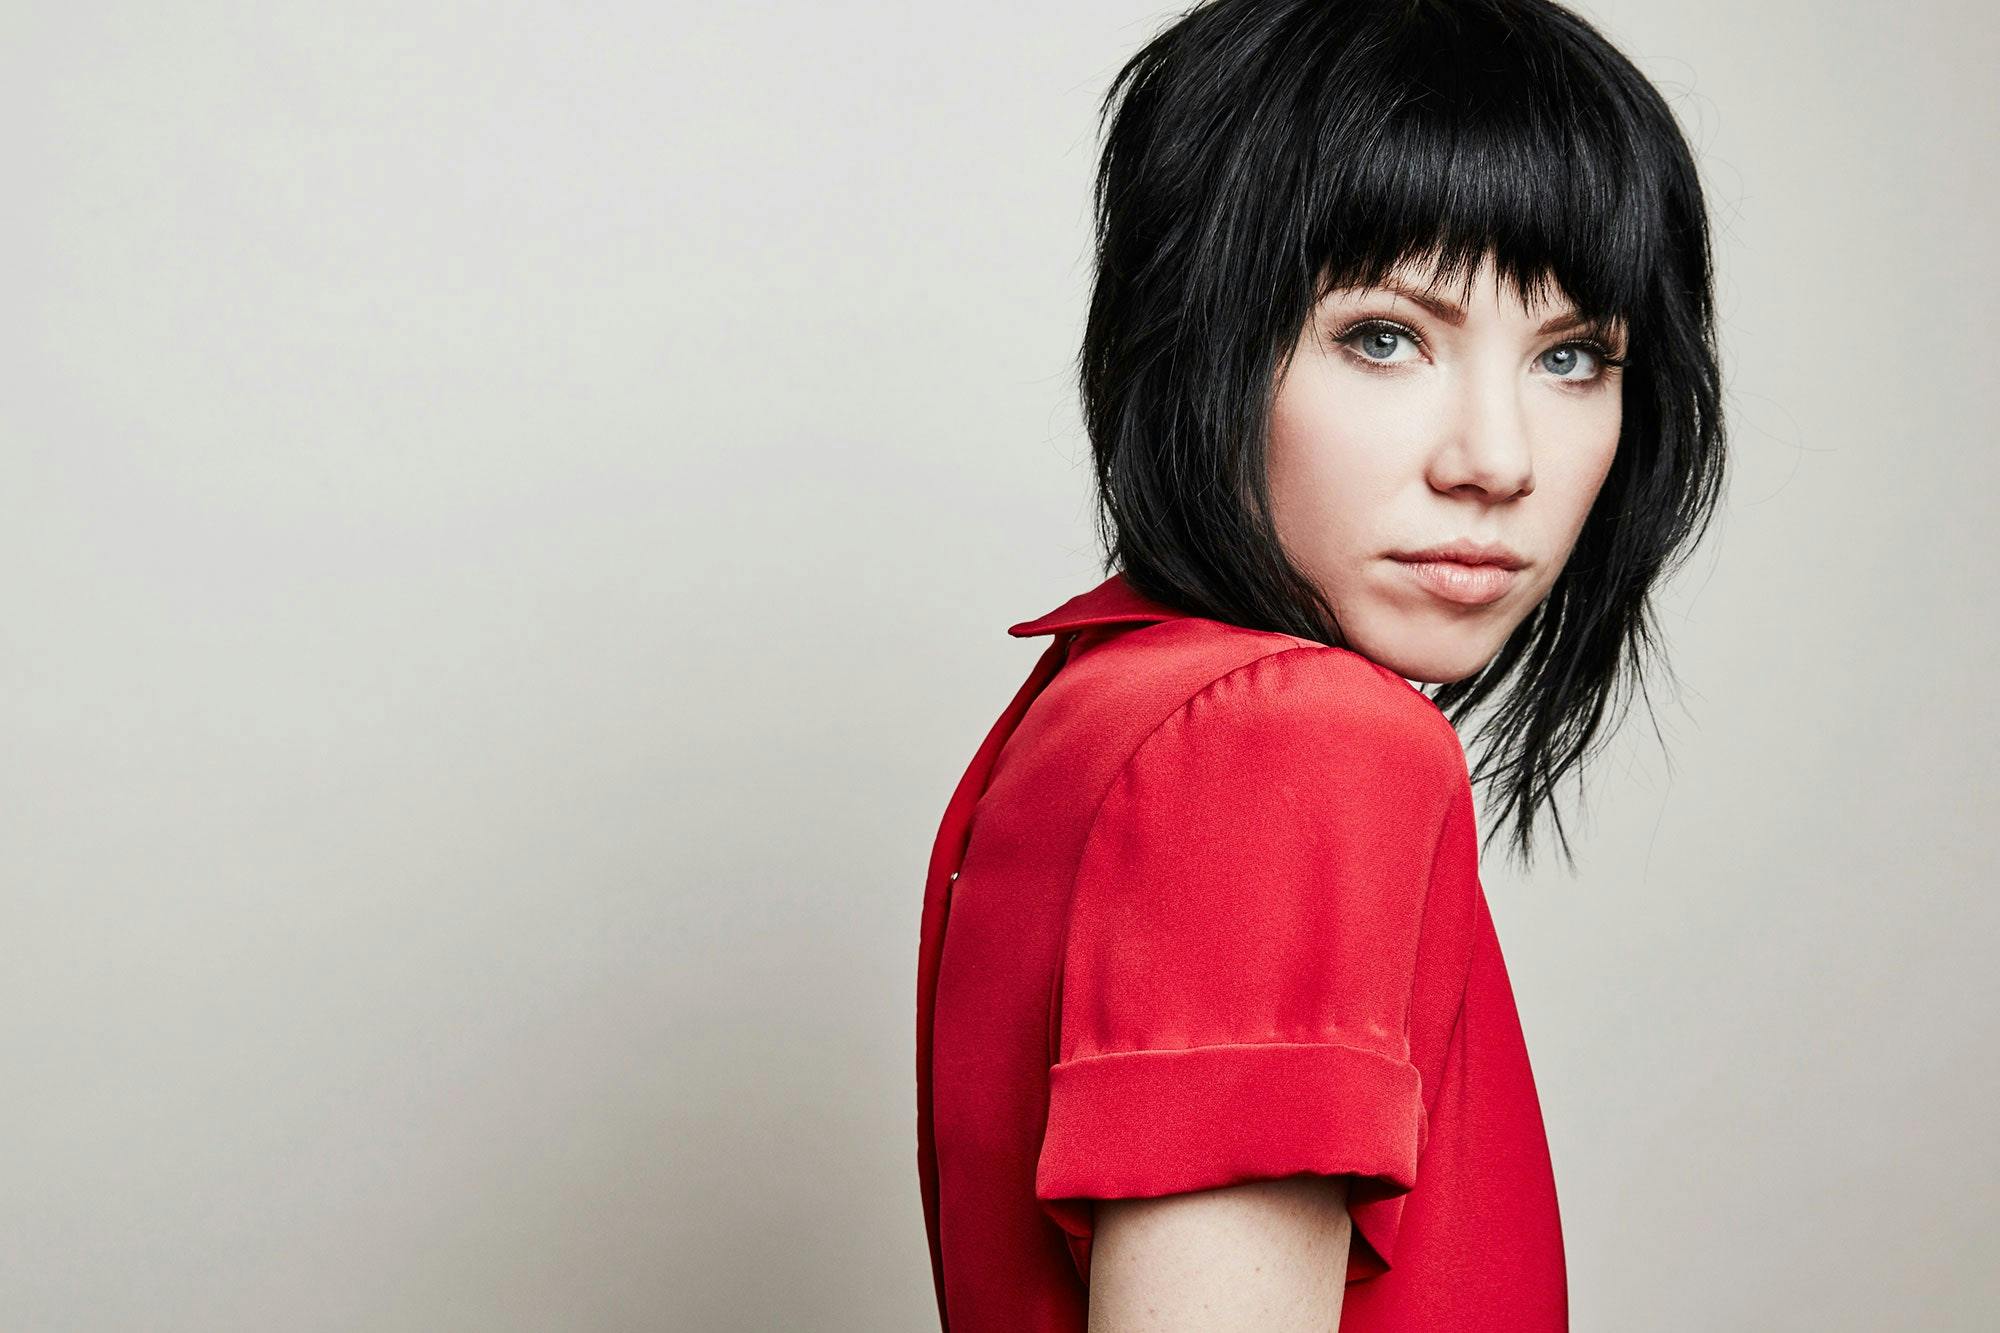 Carly Rae Jepsen Events, Tickets, Tour Dates & Concerts in